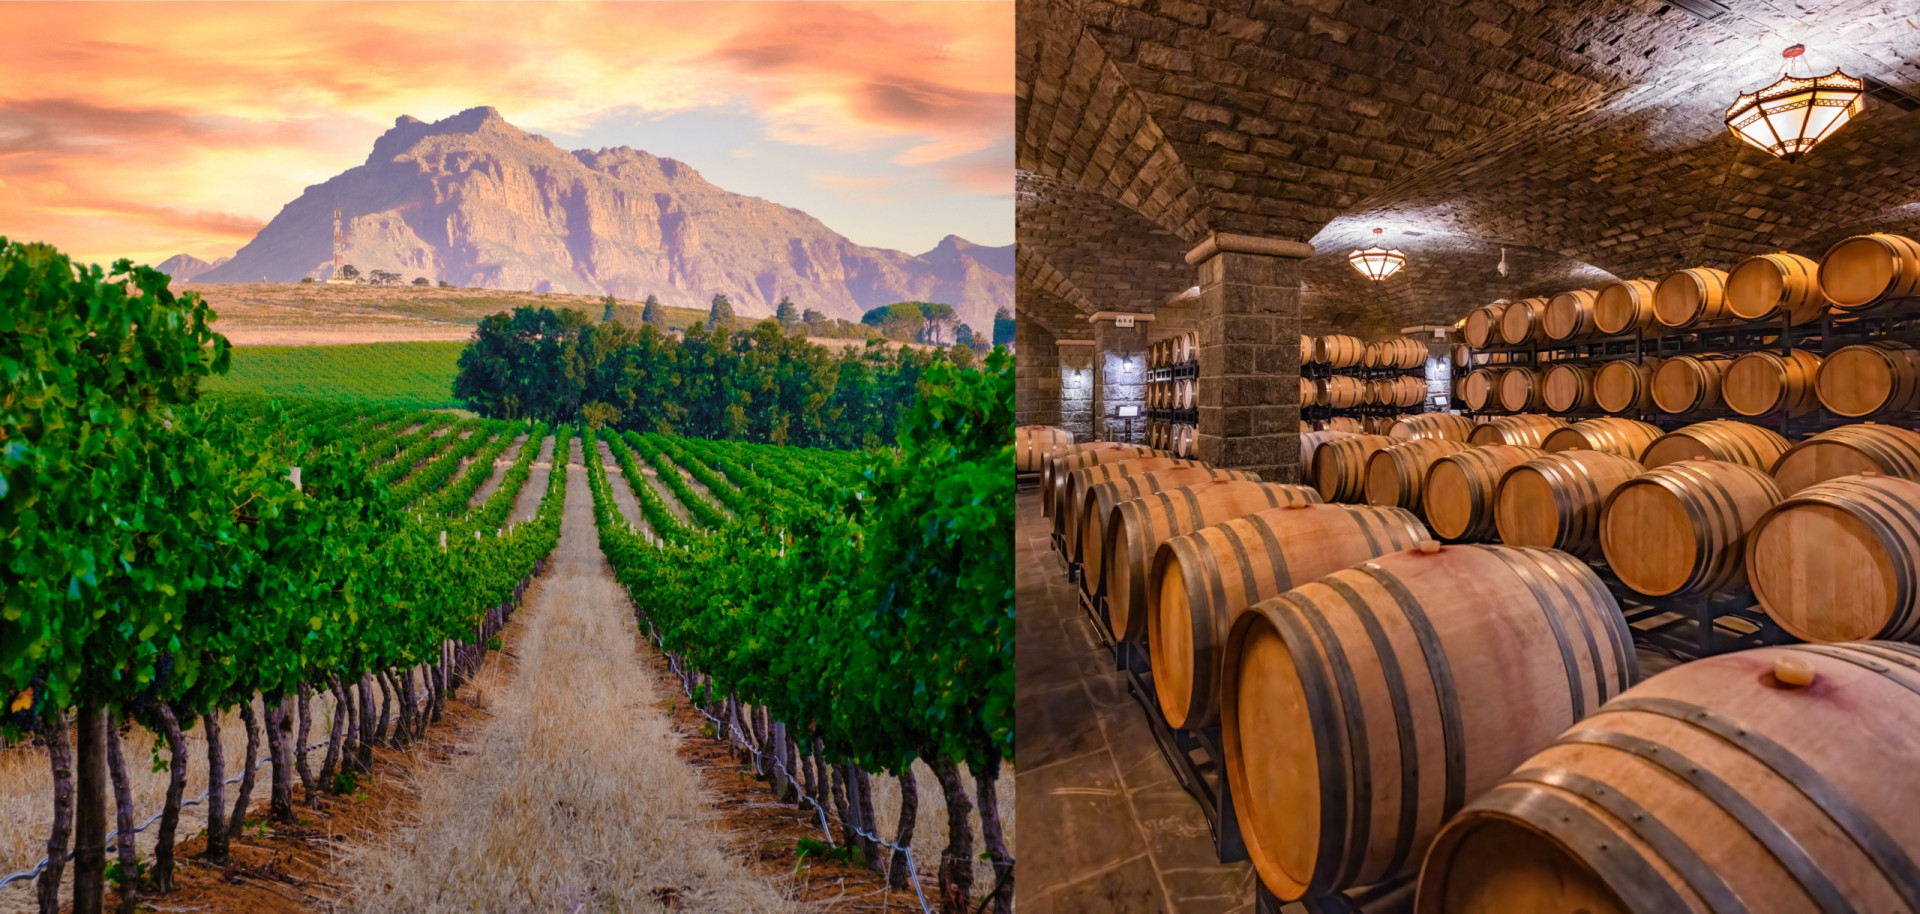 <p>Wine routes allow connoisseurs and enthusiasts of this most civilized of drinks to visit wineries and vineyards in some of the most prestigious <a href="https://www.starsinsider.com/food/225496/how-to-wine-taste-like-a-pro" rel="noopener">wine</a> regions in the world. </p><p>You may also like:<a href="https://www.starsinsider.com/n/155599?utm_source=msn.com&utm_medium=display&utm_campaign=referral_description&utm_content=223384v5en-us"> The dark side of fashion: mental illness in the fashion industry</a></p>